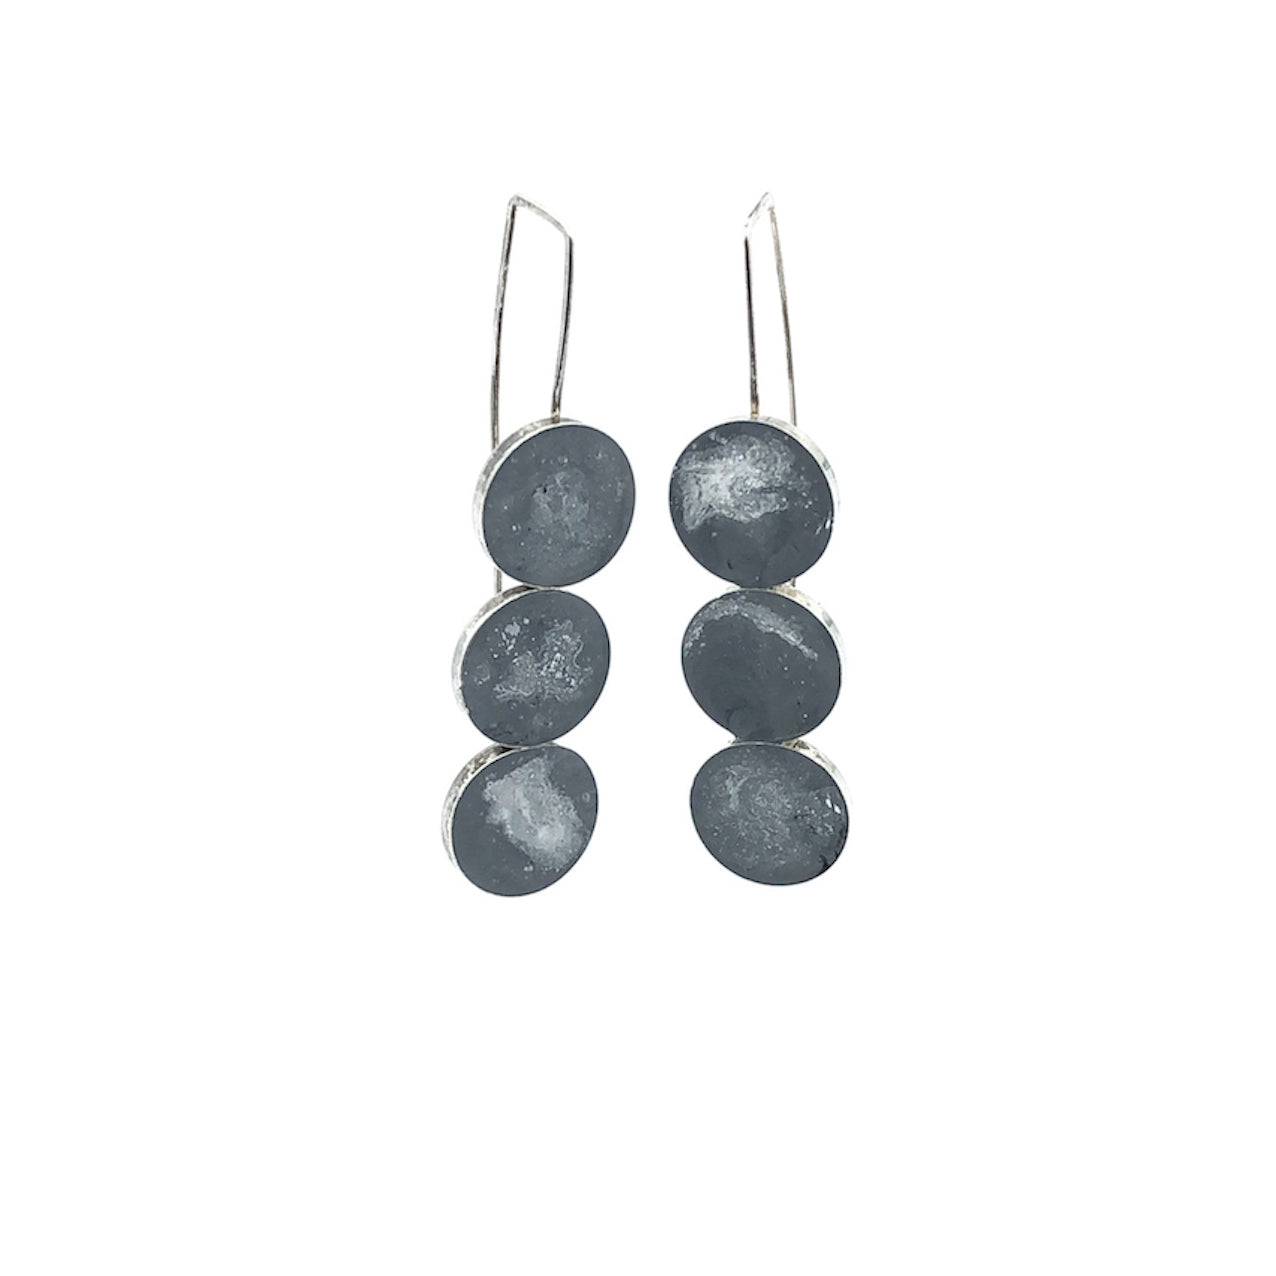 long grey dangly sterling silver earrings with three round resin elements